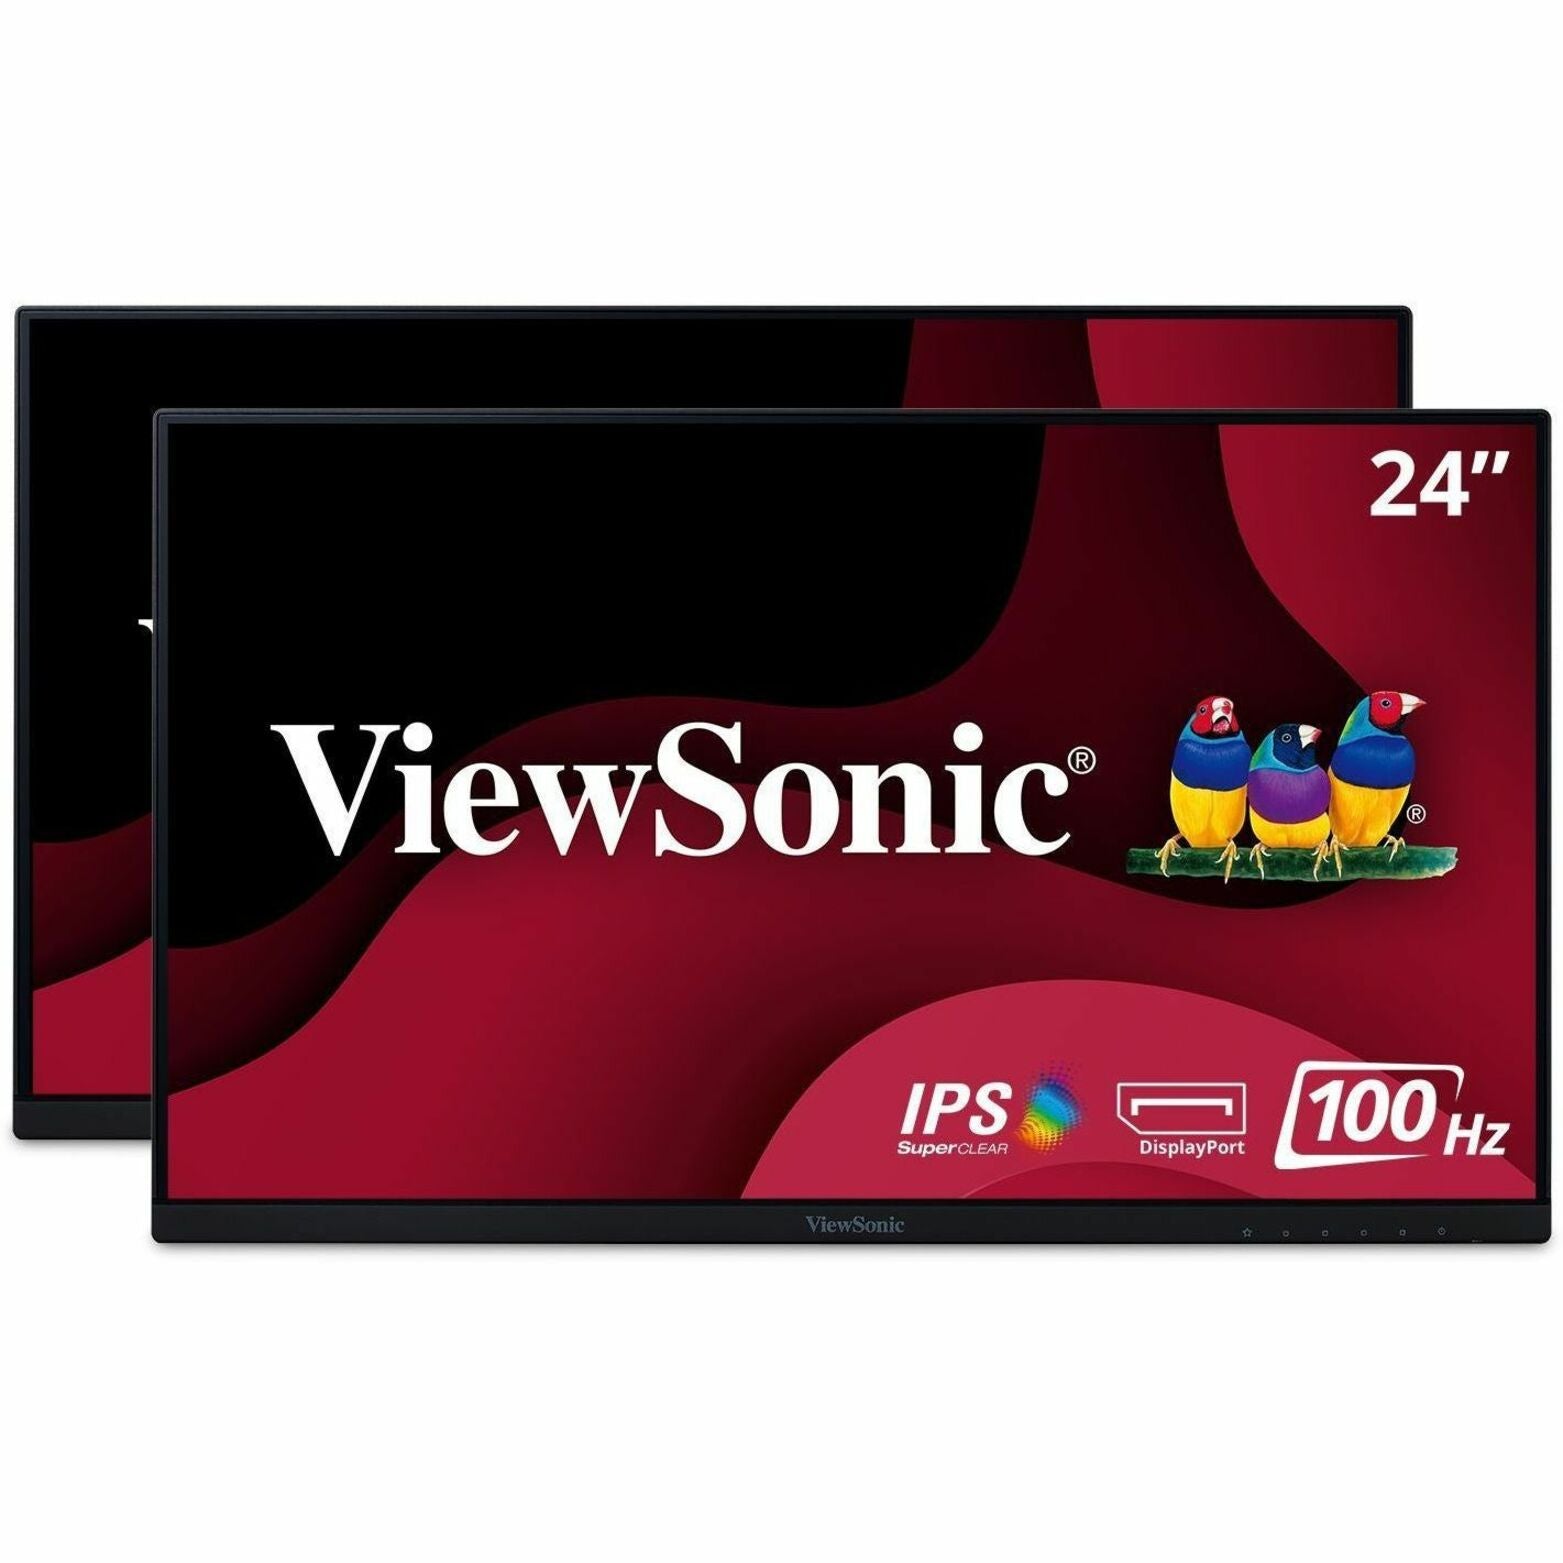 ViewSonic VA2456-MHD_H2 Widescreen LCD Monitor, Dual Monitors with SuperClear IPS Panel, 1920x1080 Resolution